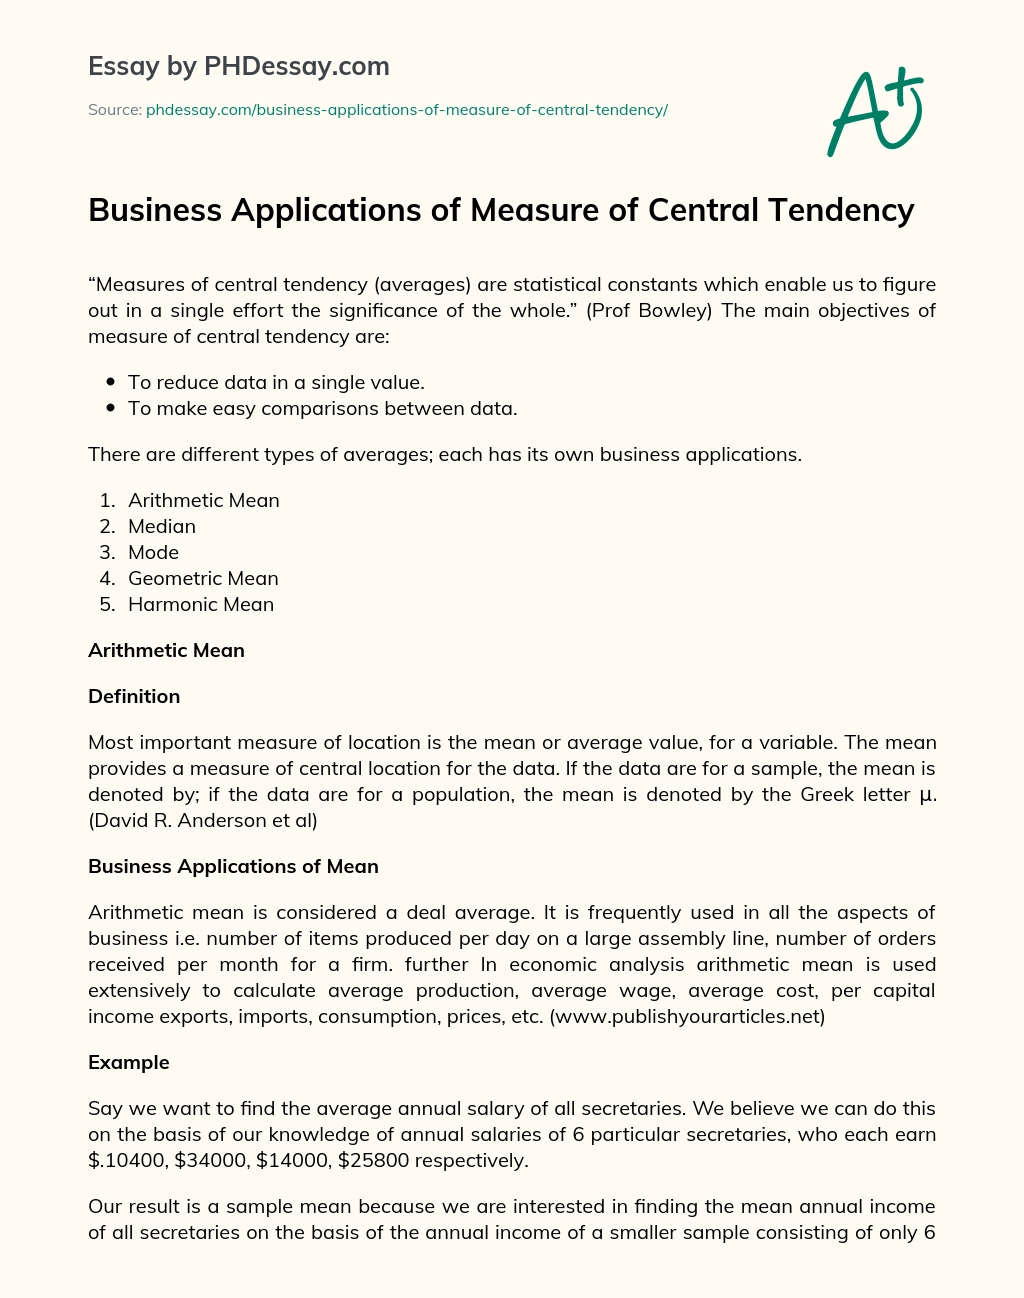 Business Applications of Measure of Central Tendency essay